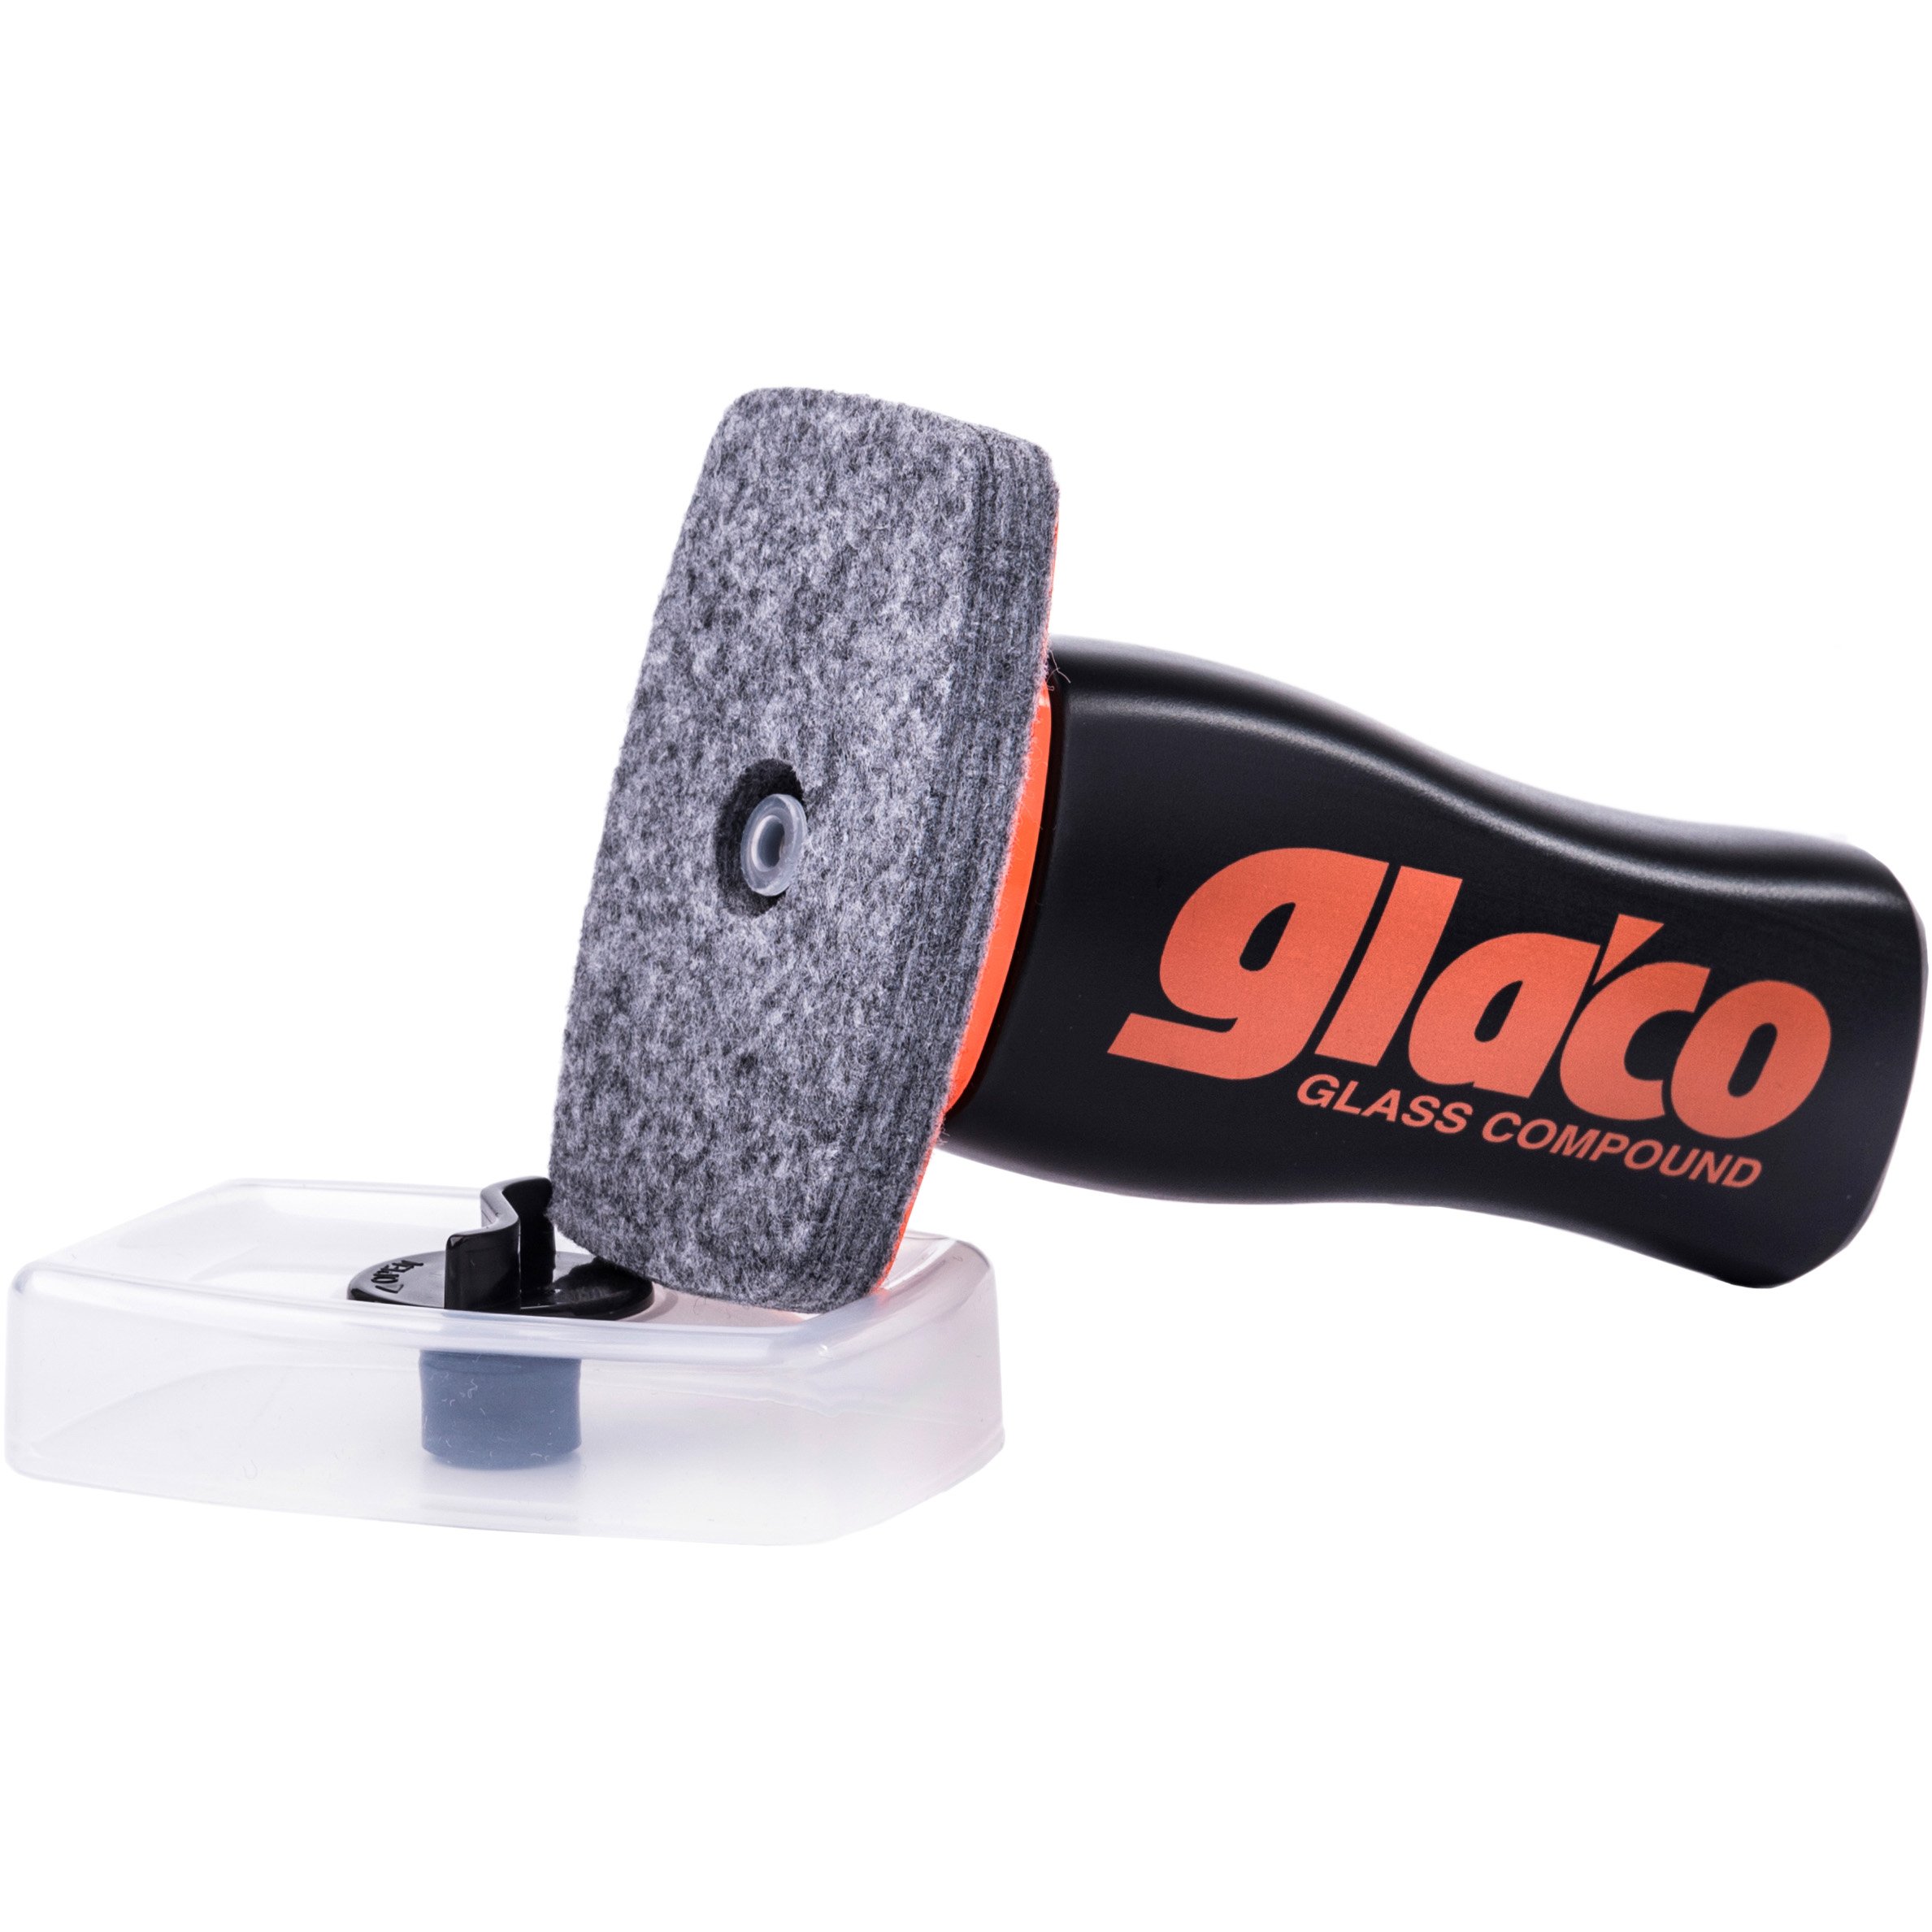 Glaco Glass Compound Roll On - 100ml